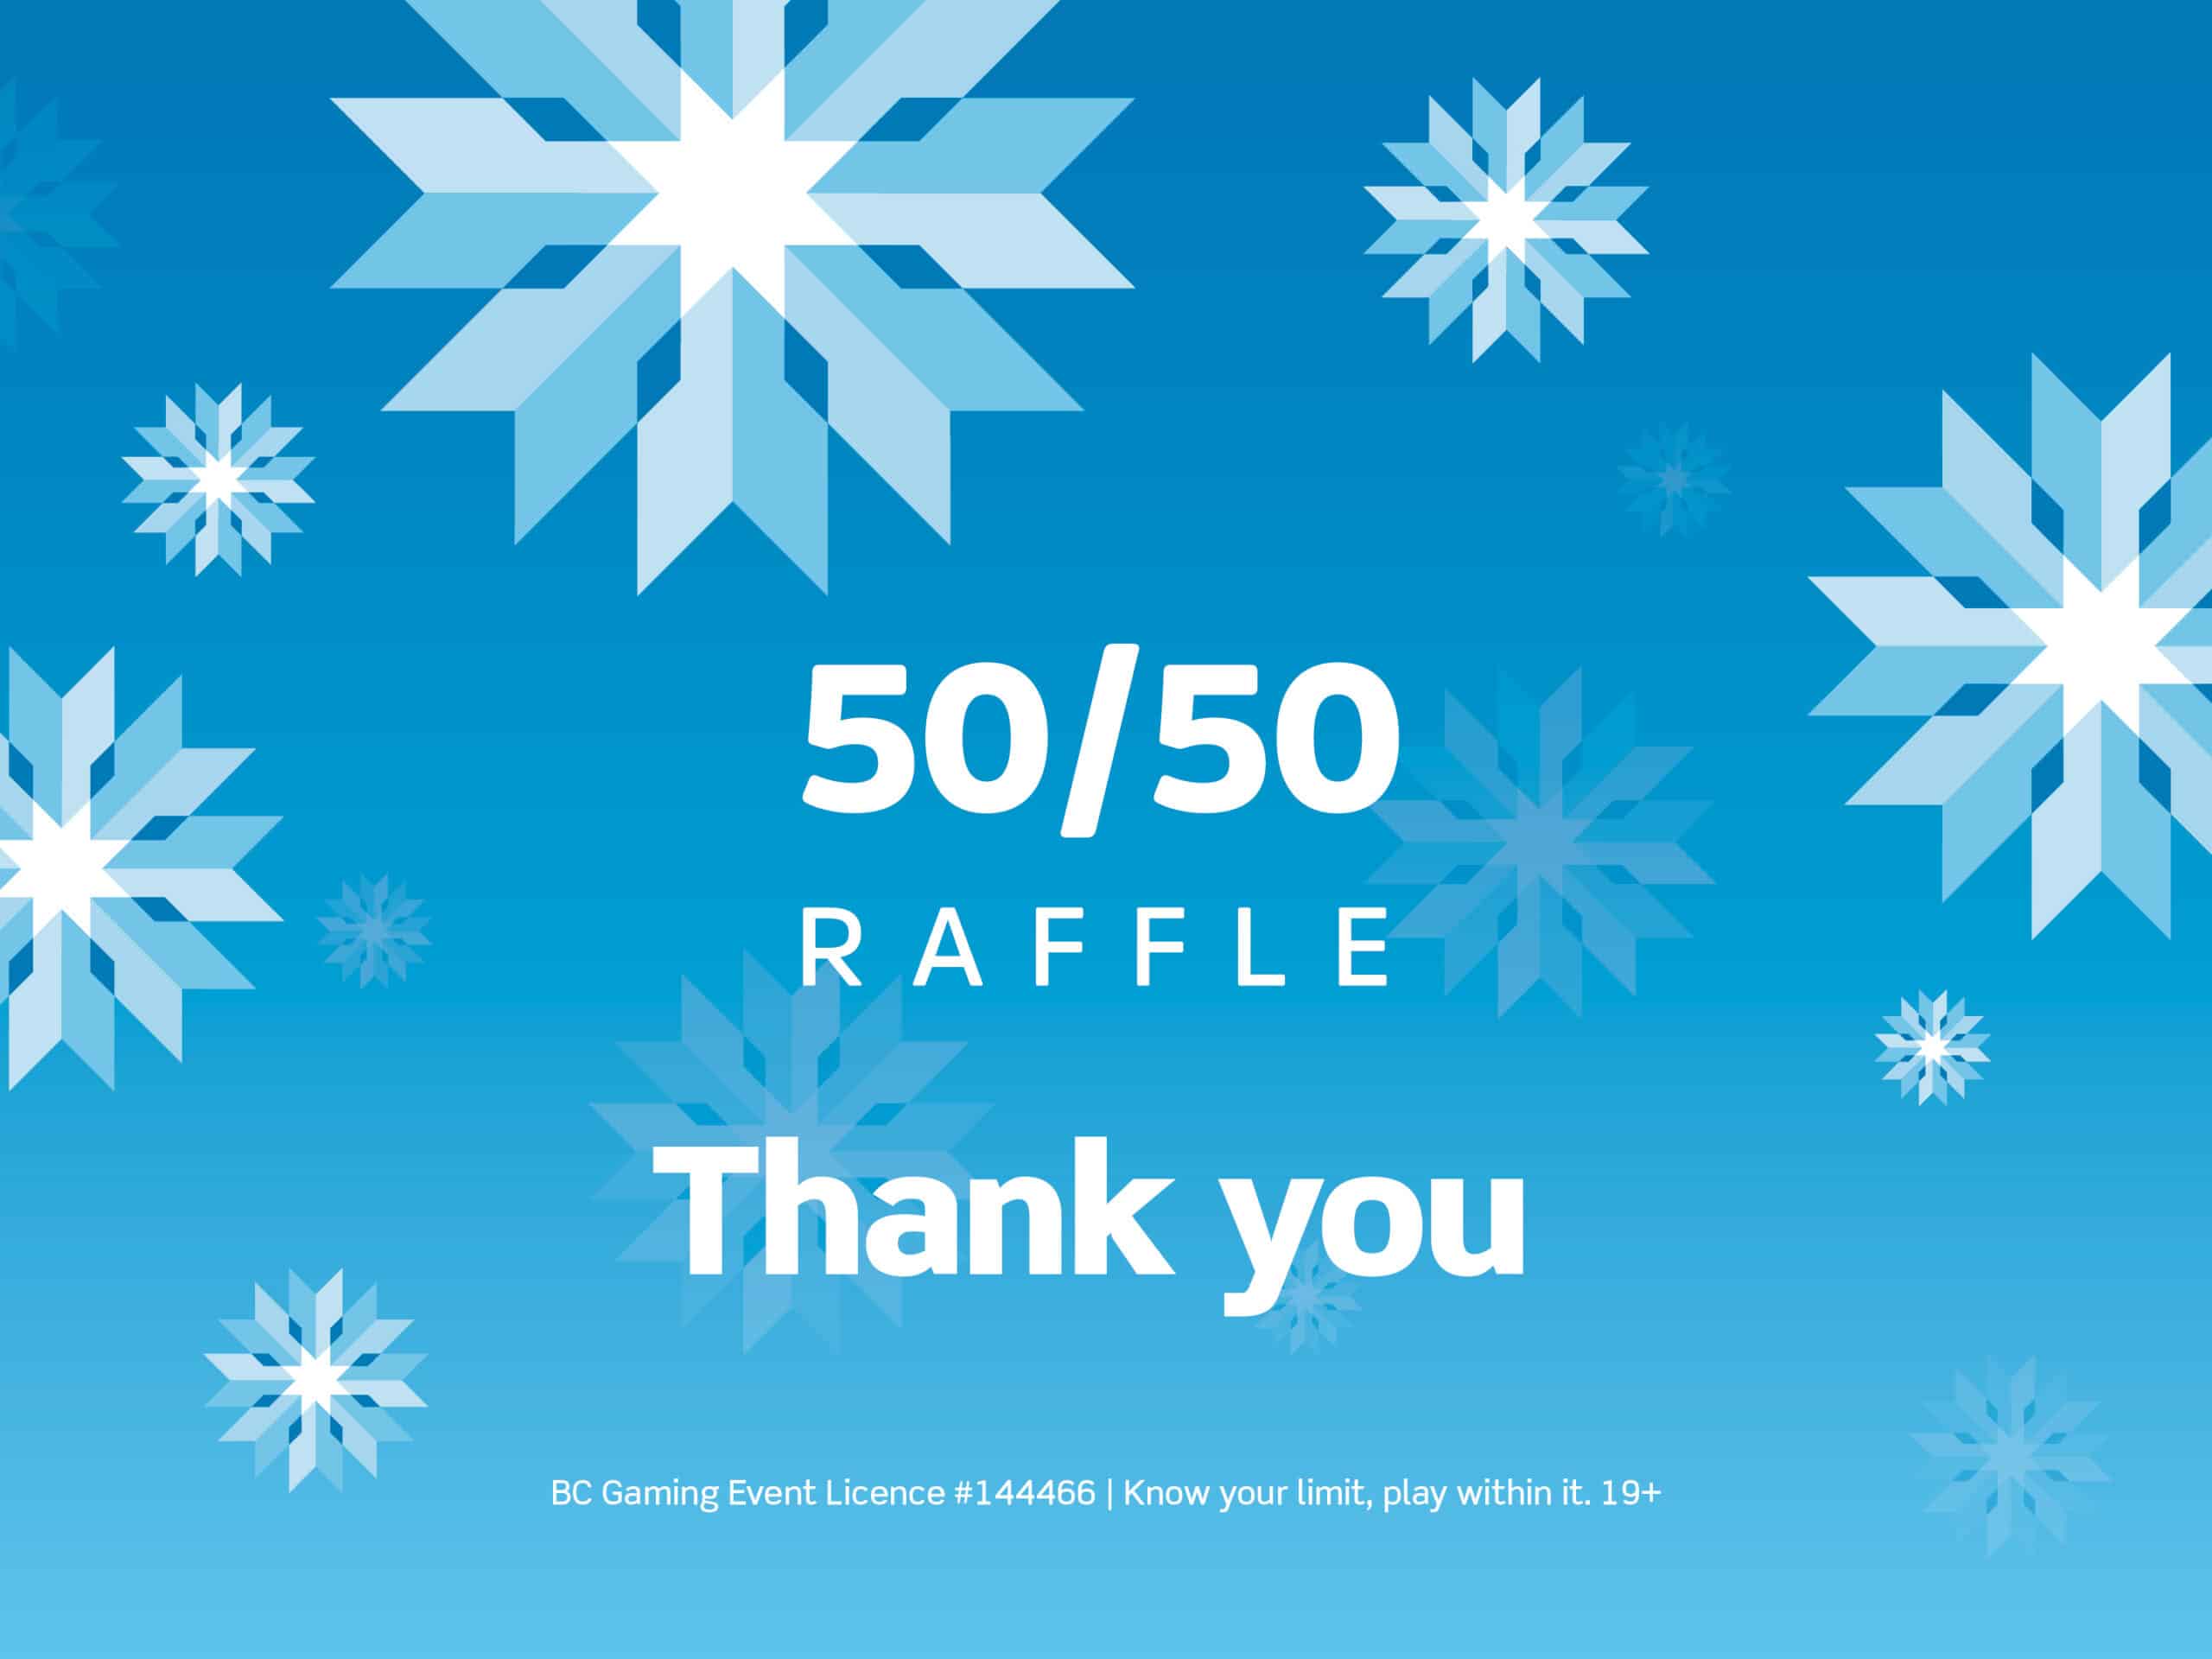 50/50 winter raffle thank you graphic